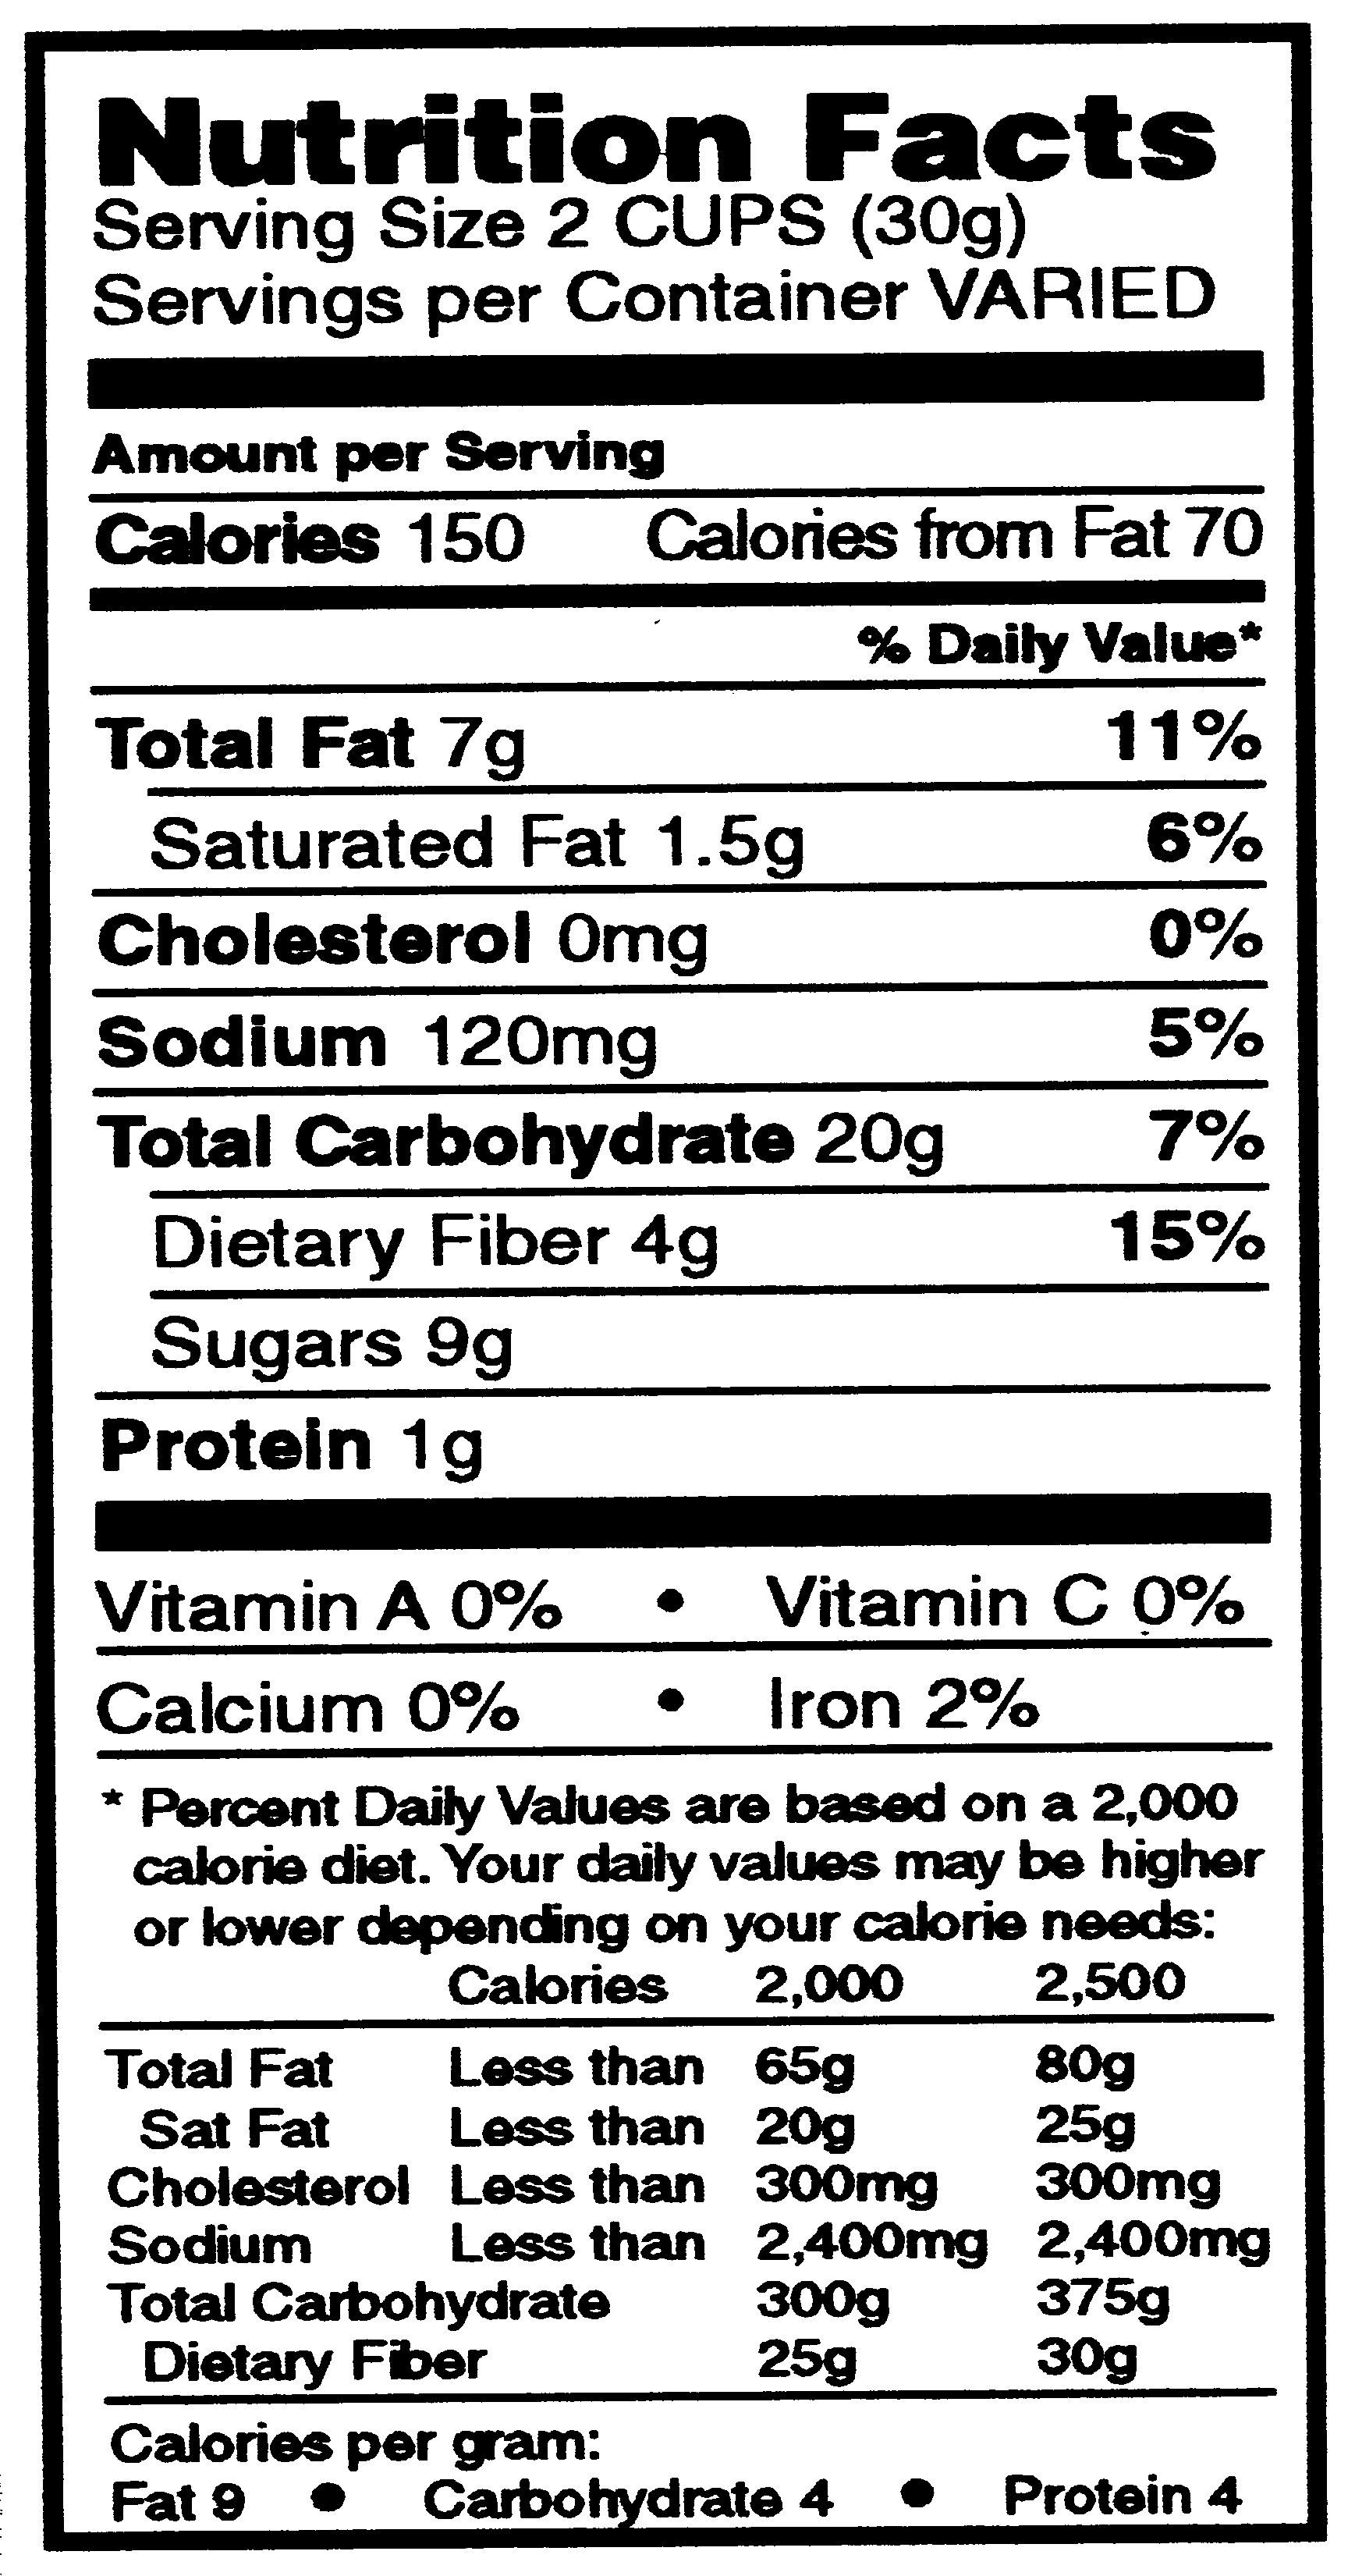 NUTRITIONAL FACTS. 